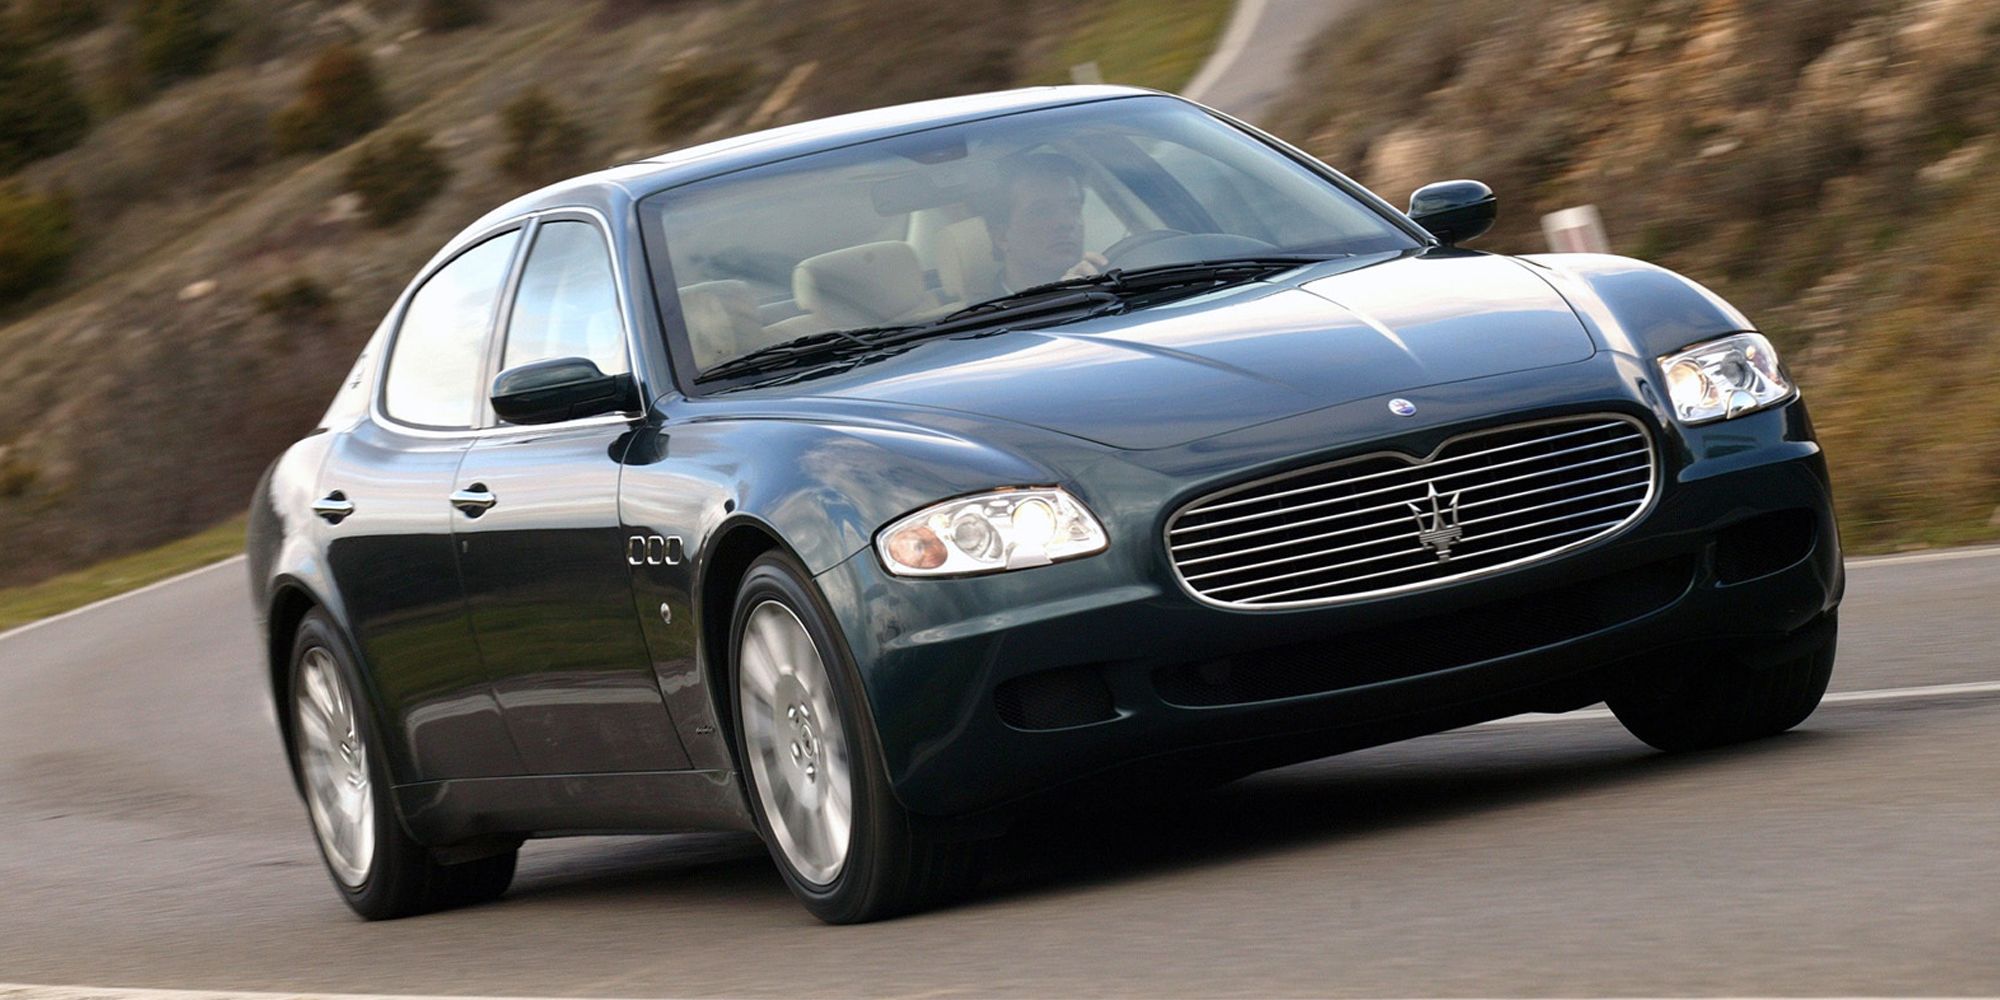 The front of a dark green Quattroporte on the move